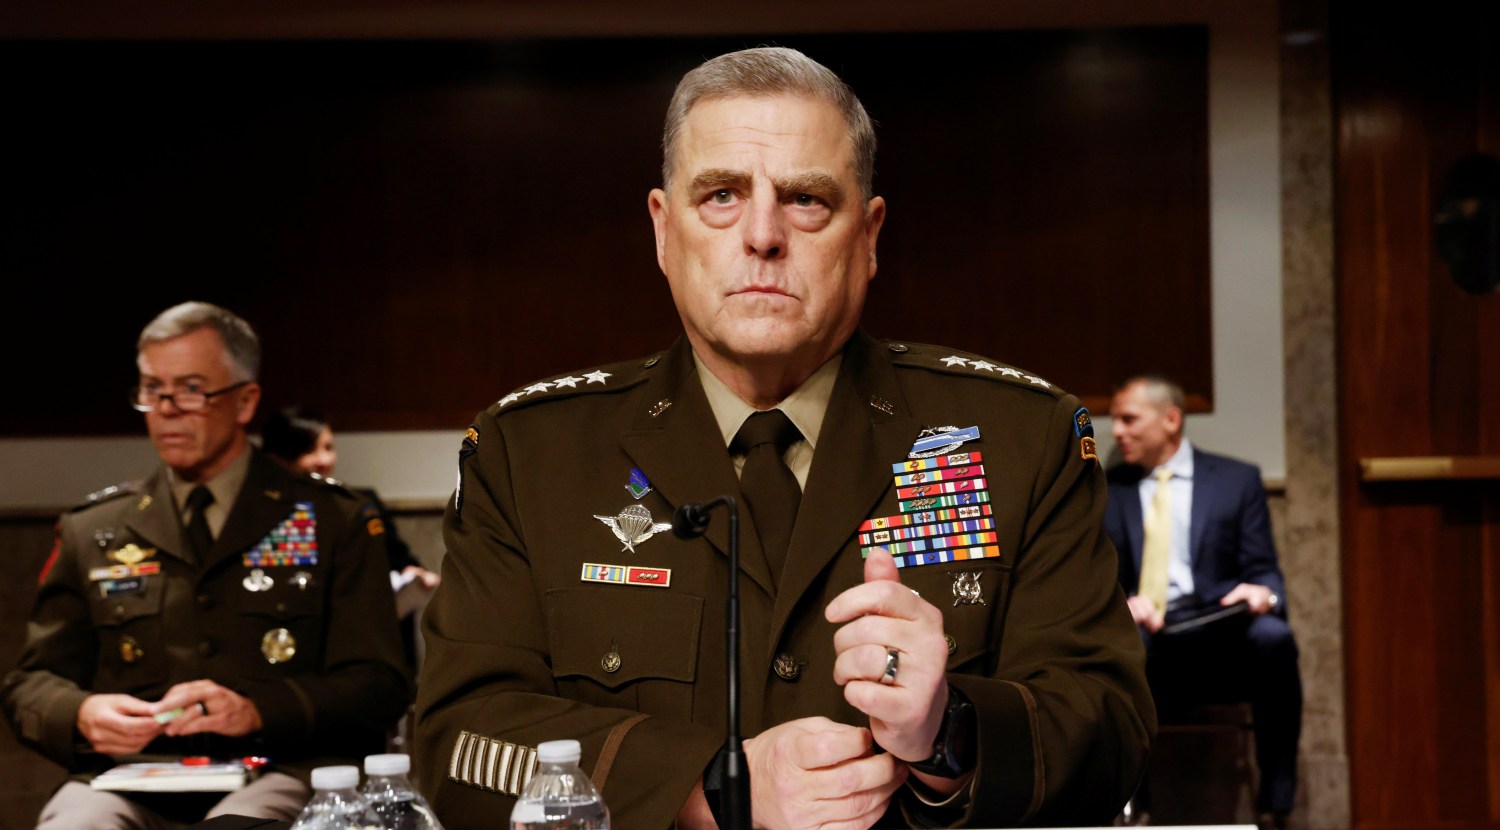 General Milley, critical race theory and why GOP's 'woke' military concerns  miss the mark